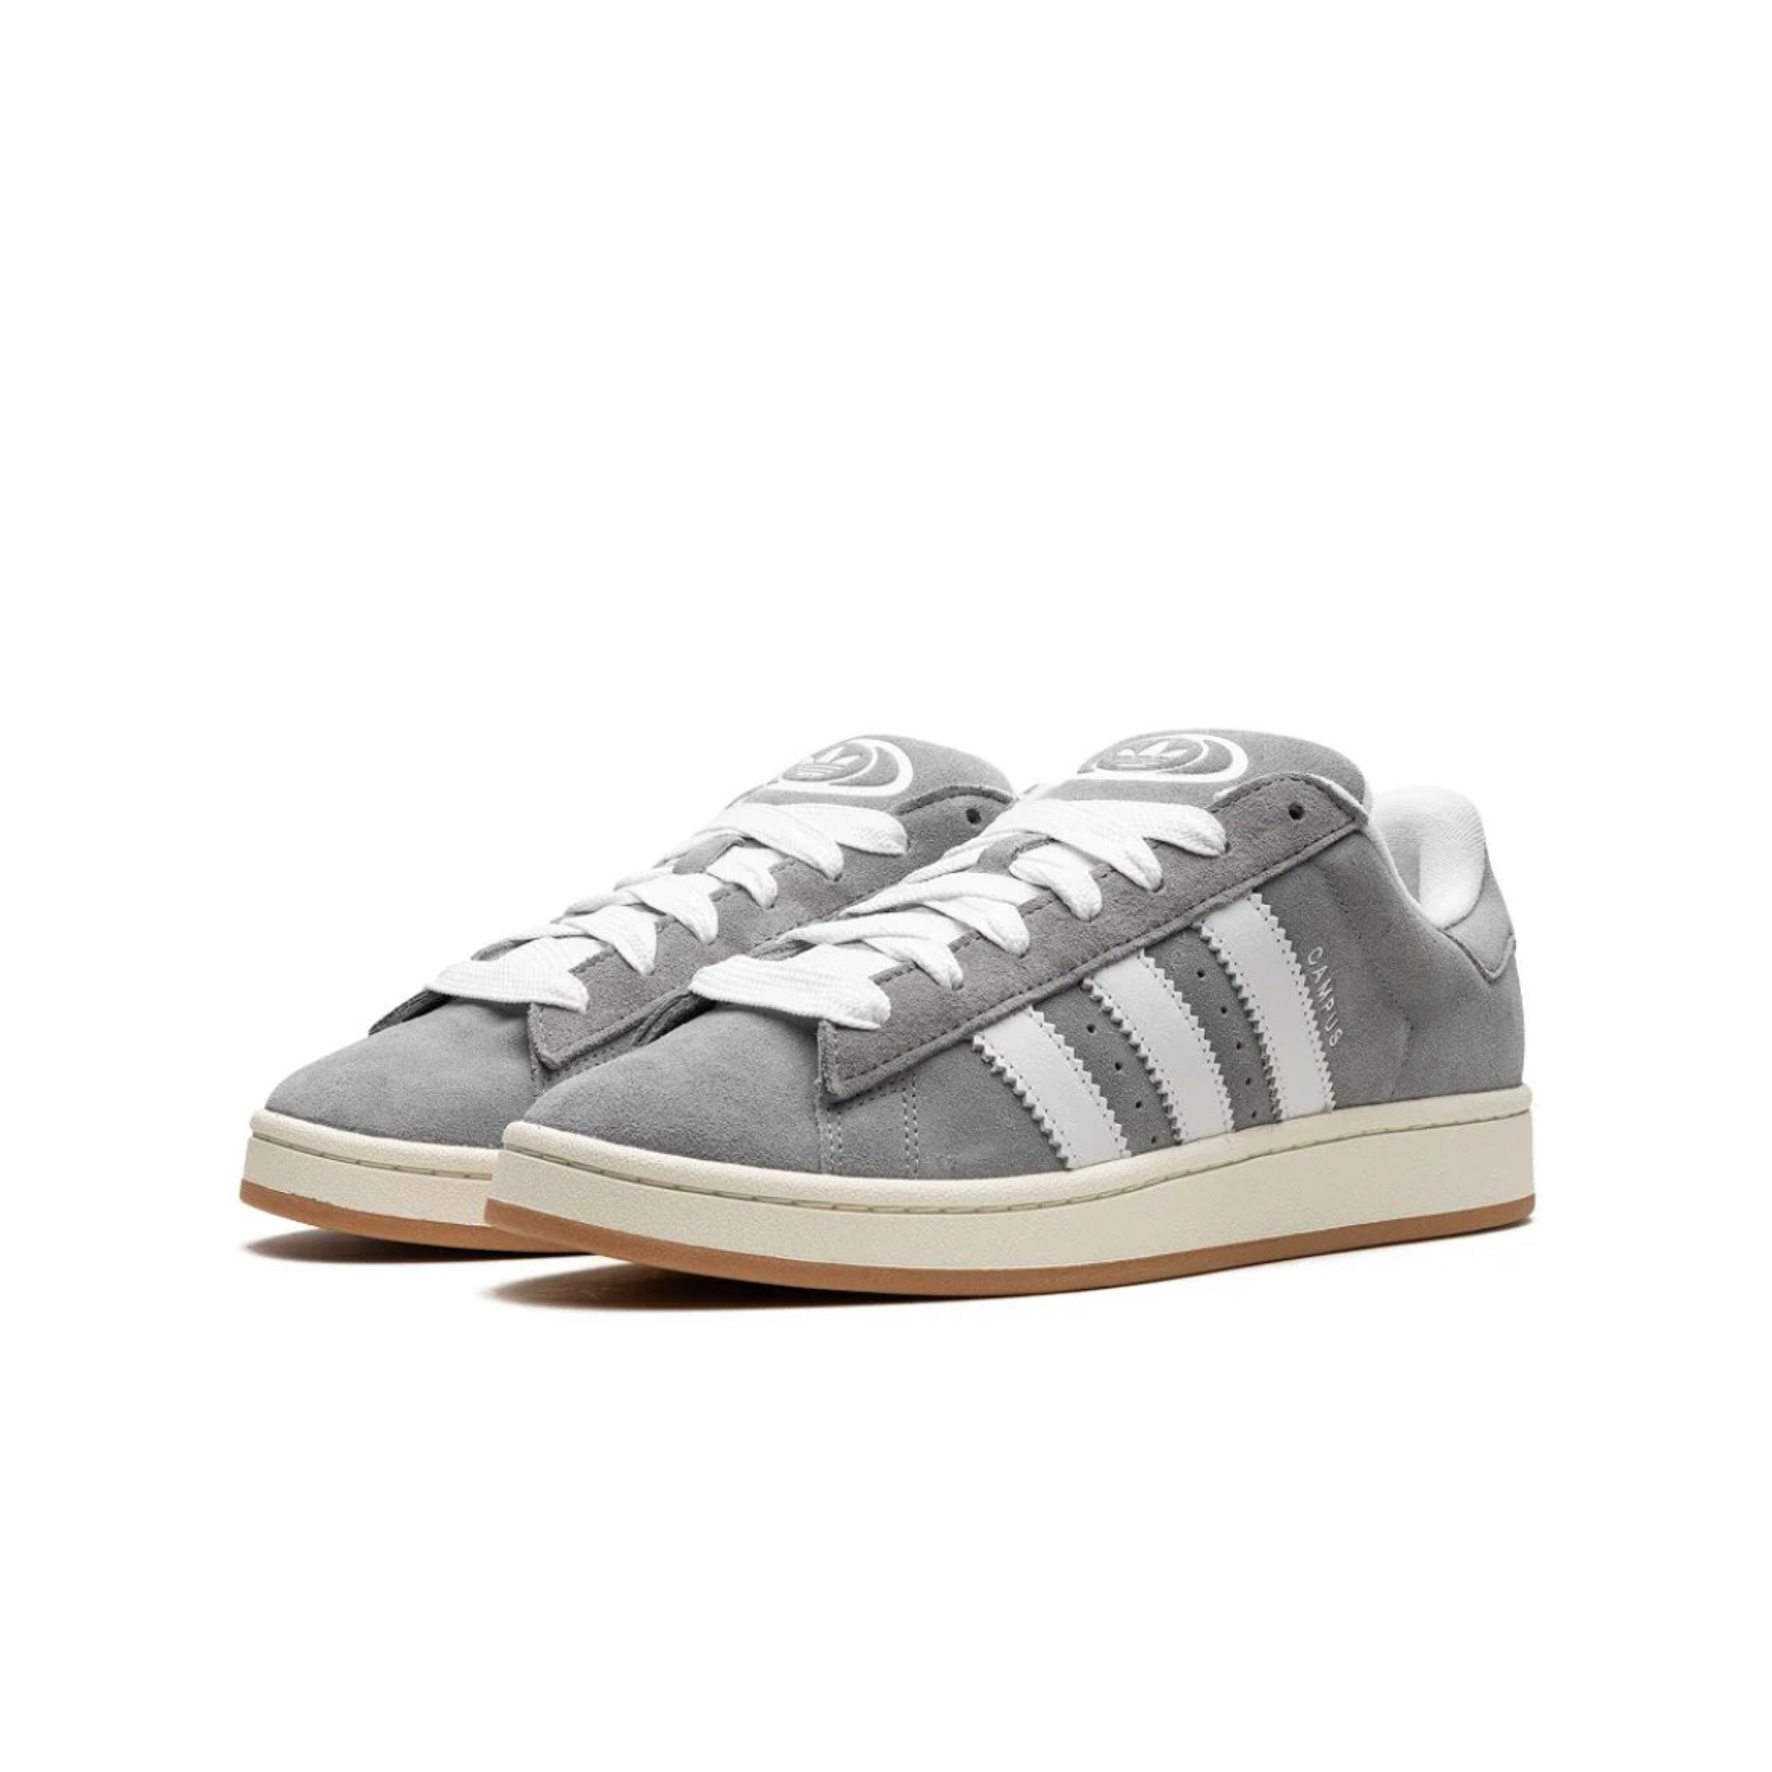 Adidas Campus 00s J Grey White - The Global Hype